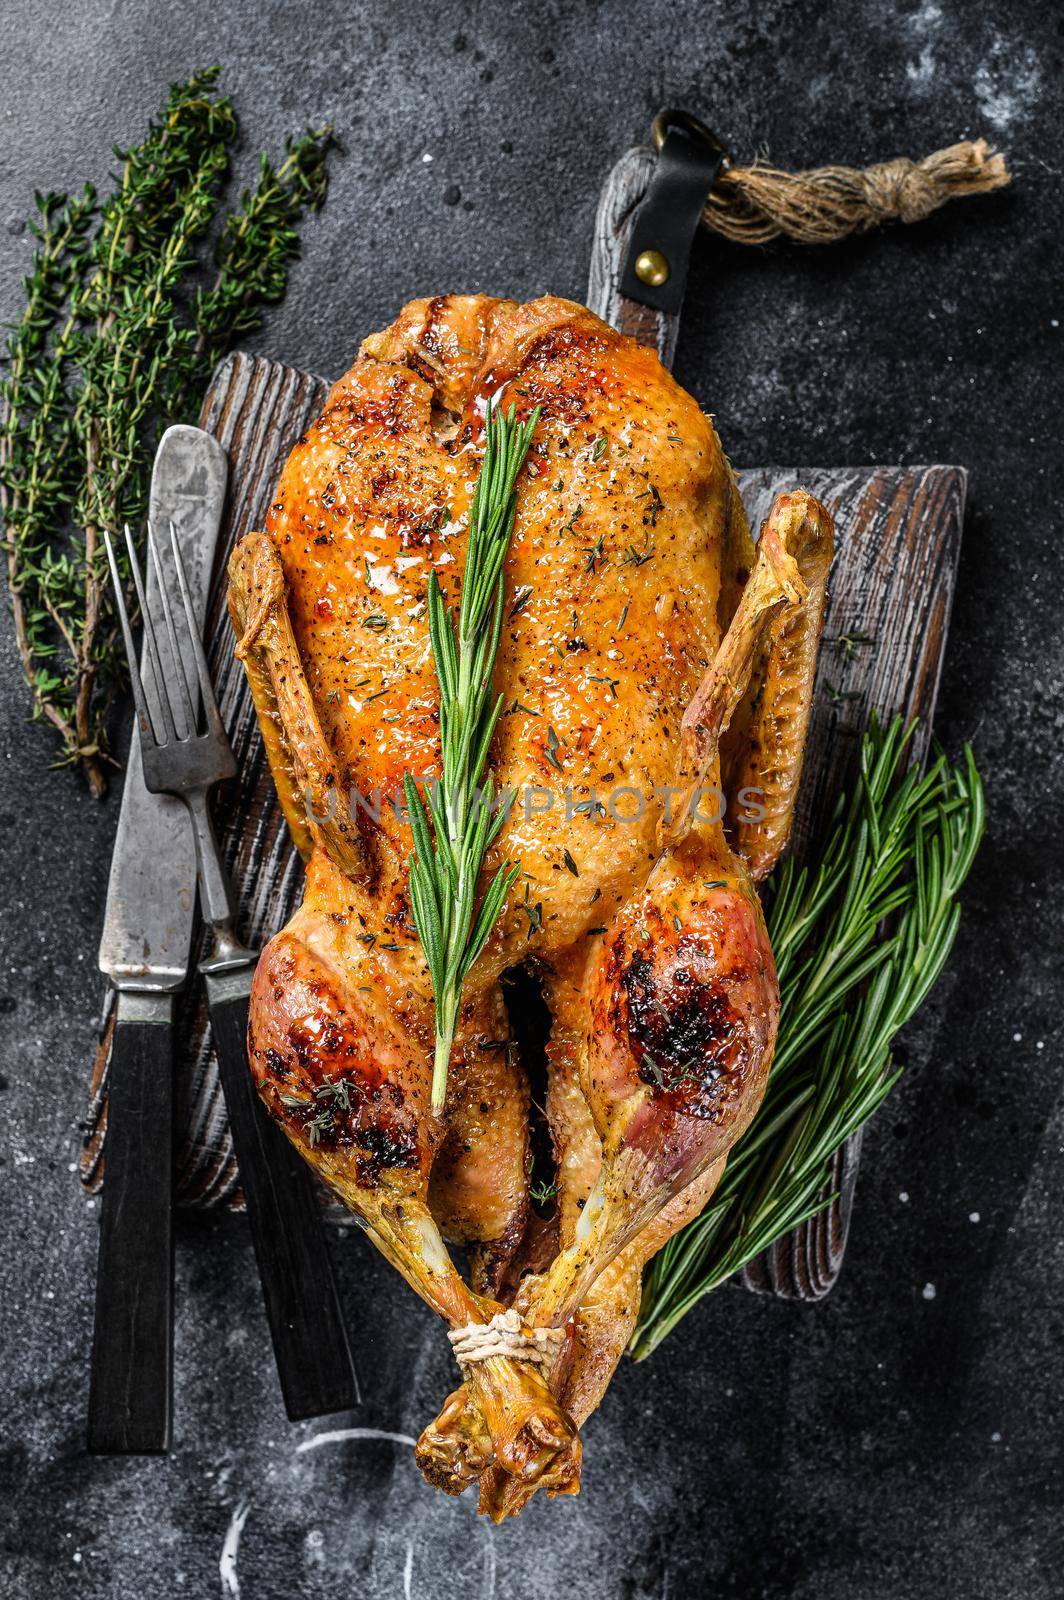 Roast duck stuffed with baked apples, festive christmas recipe. Black background. Top view.